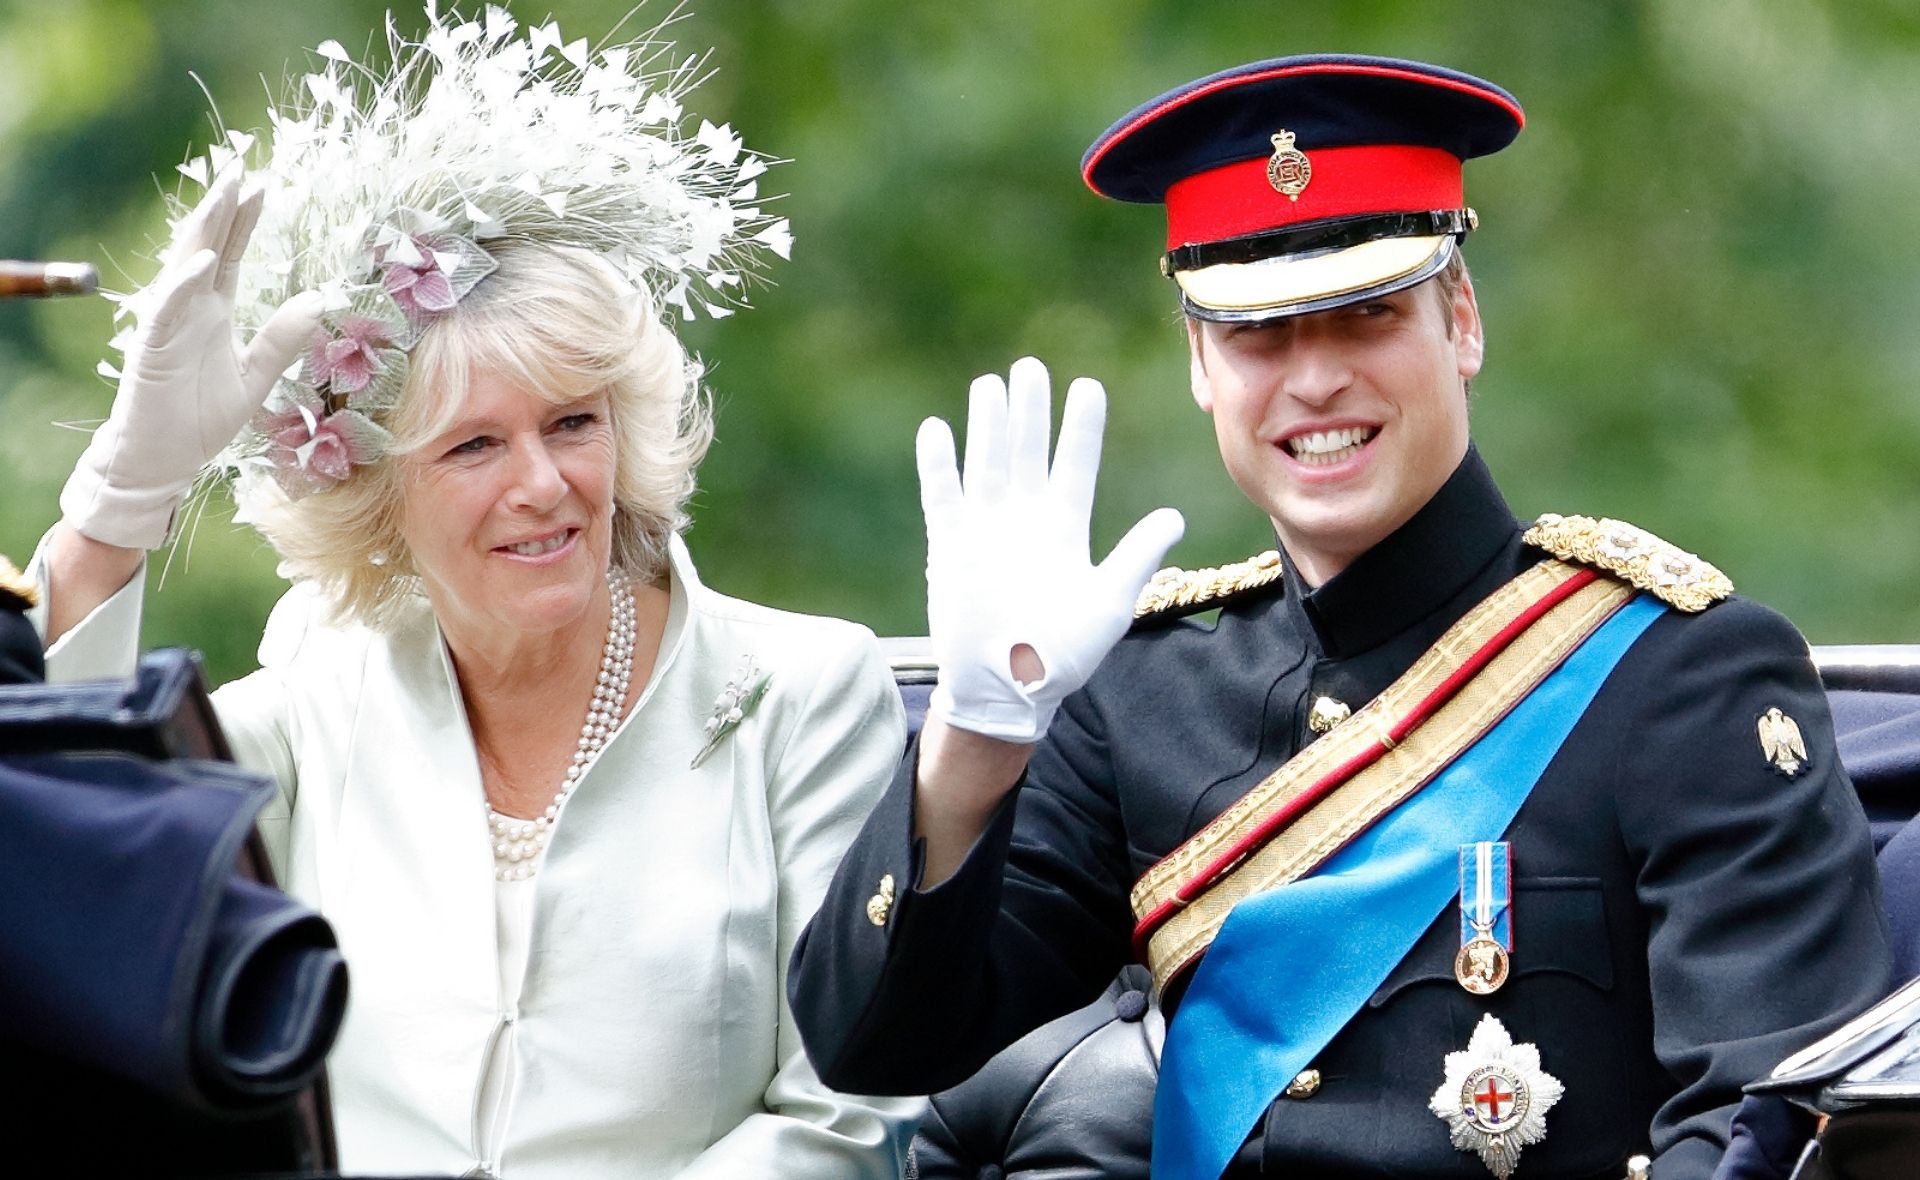 After 16 years, Prince William mends his “uneasy” relationship with his stepmum Camilla, Duchess of Cornwall